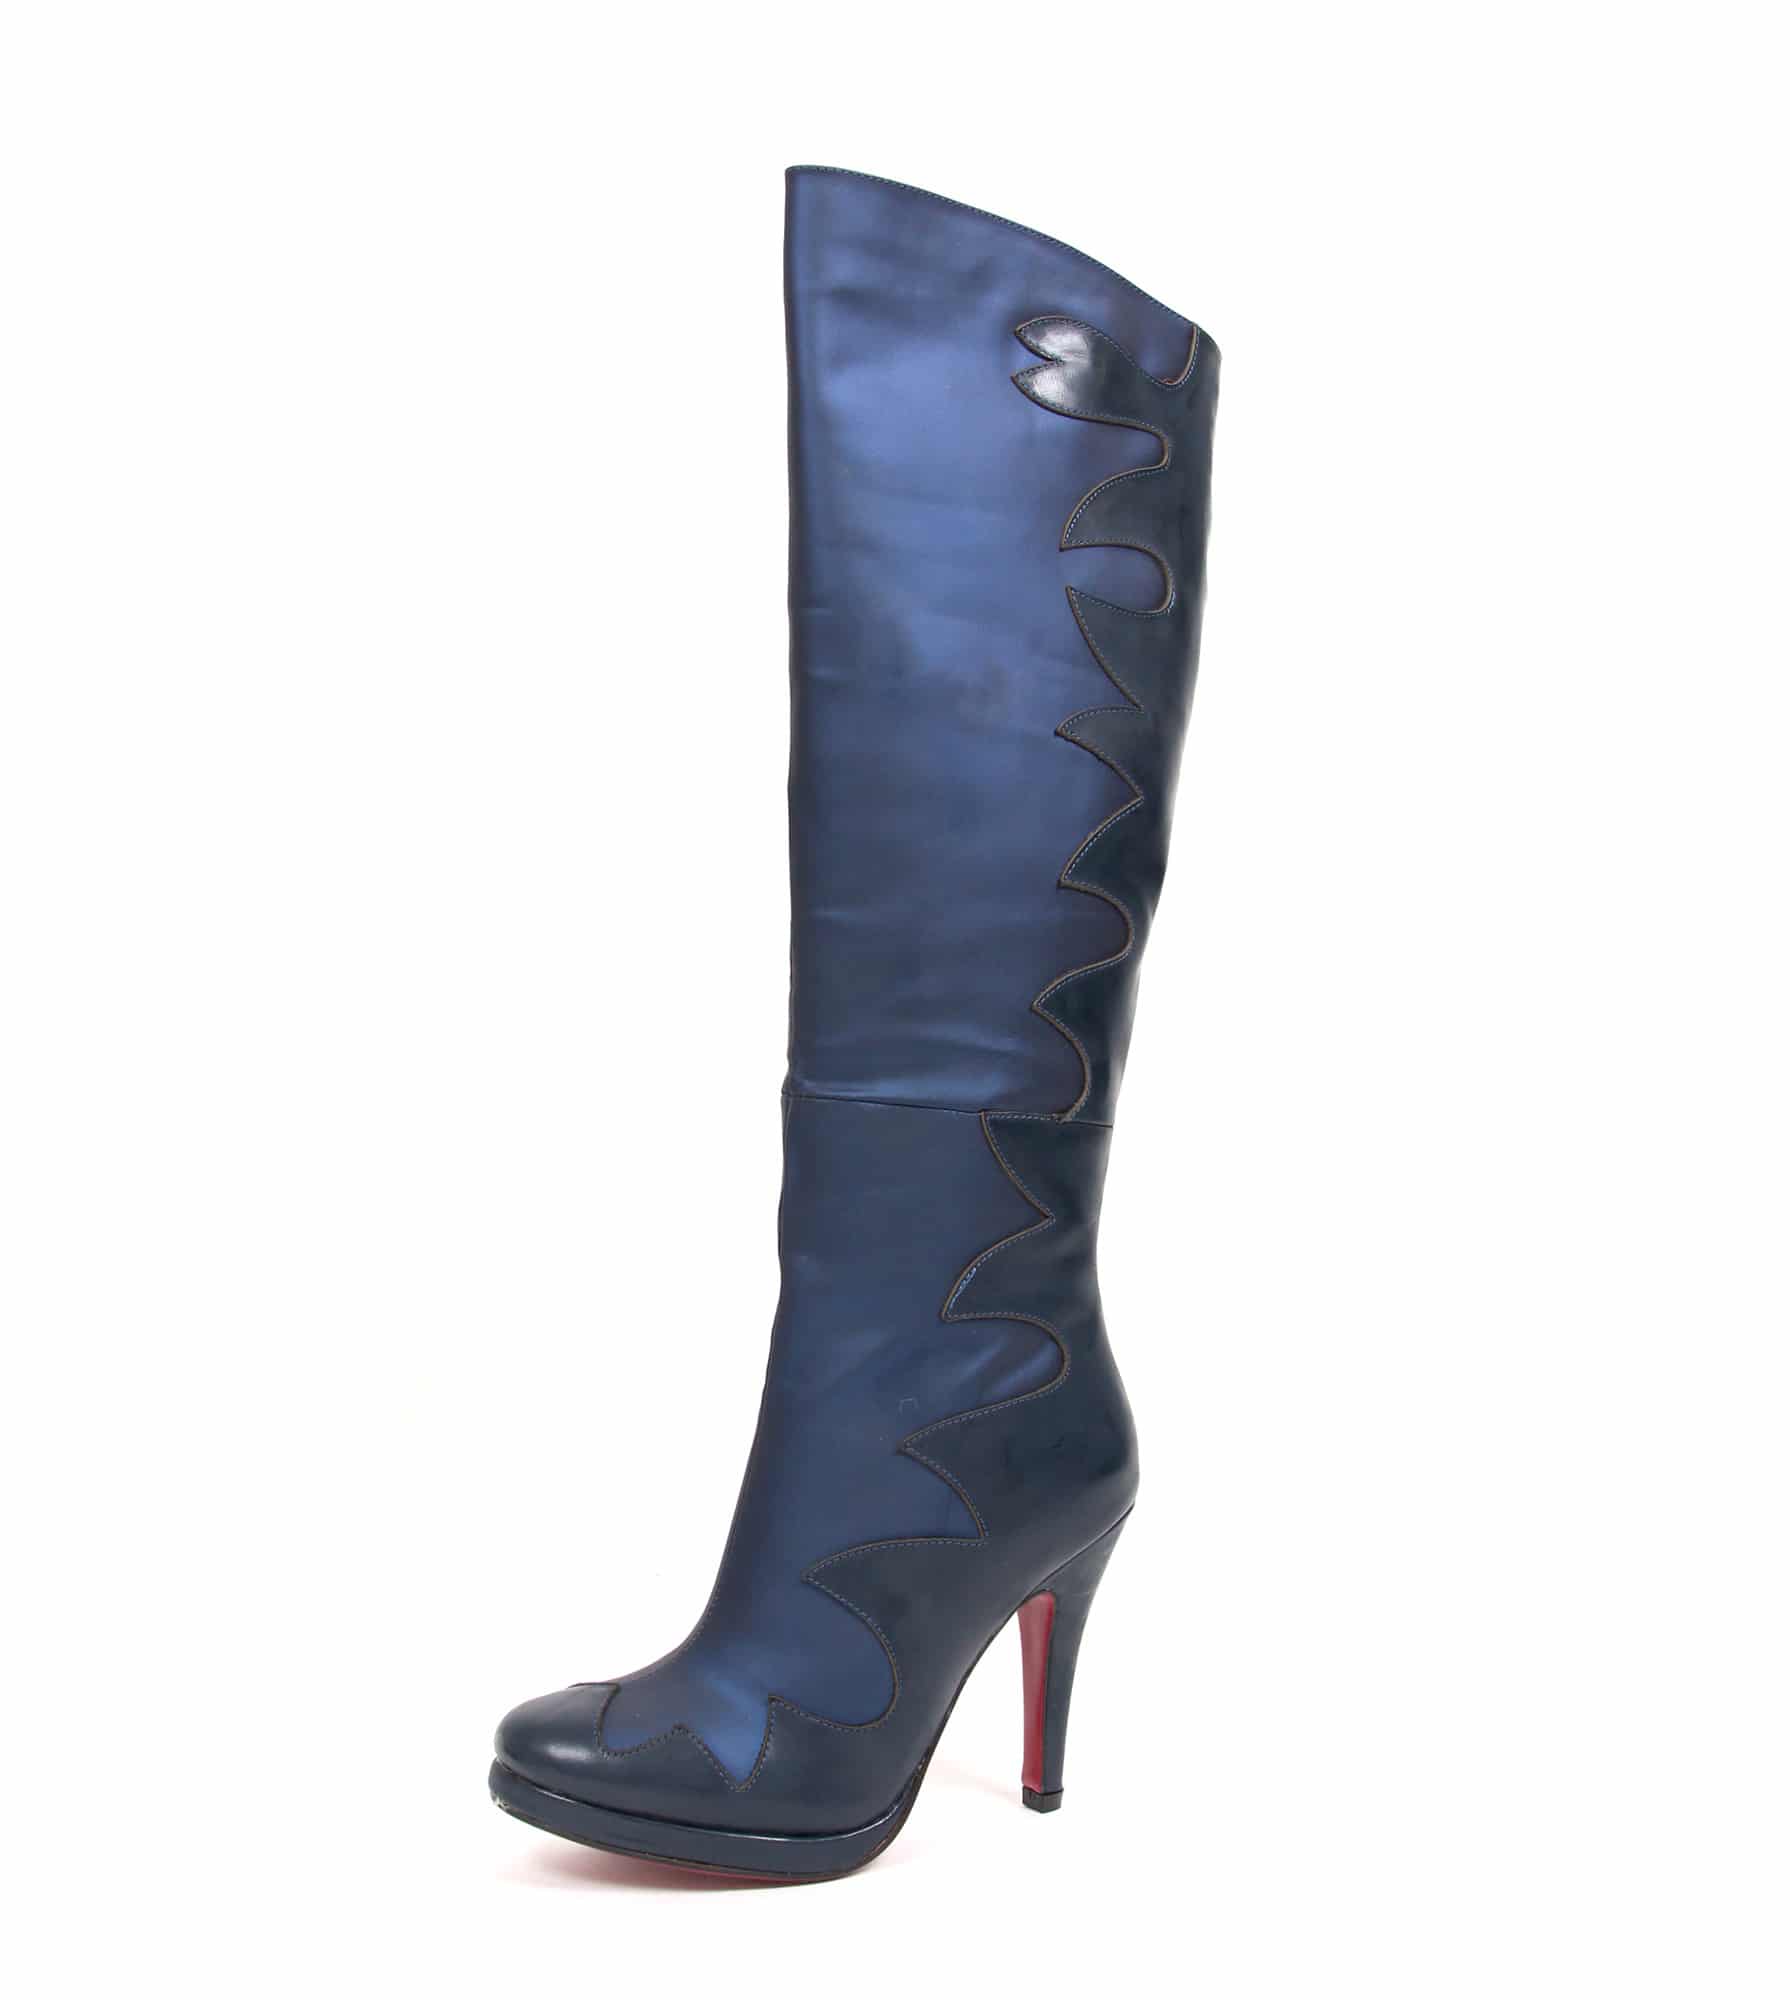 Buy > navy leather knee high boots > in stock